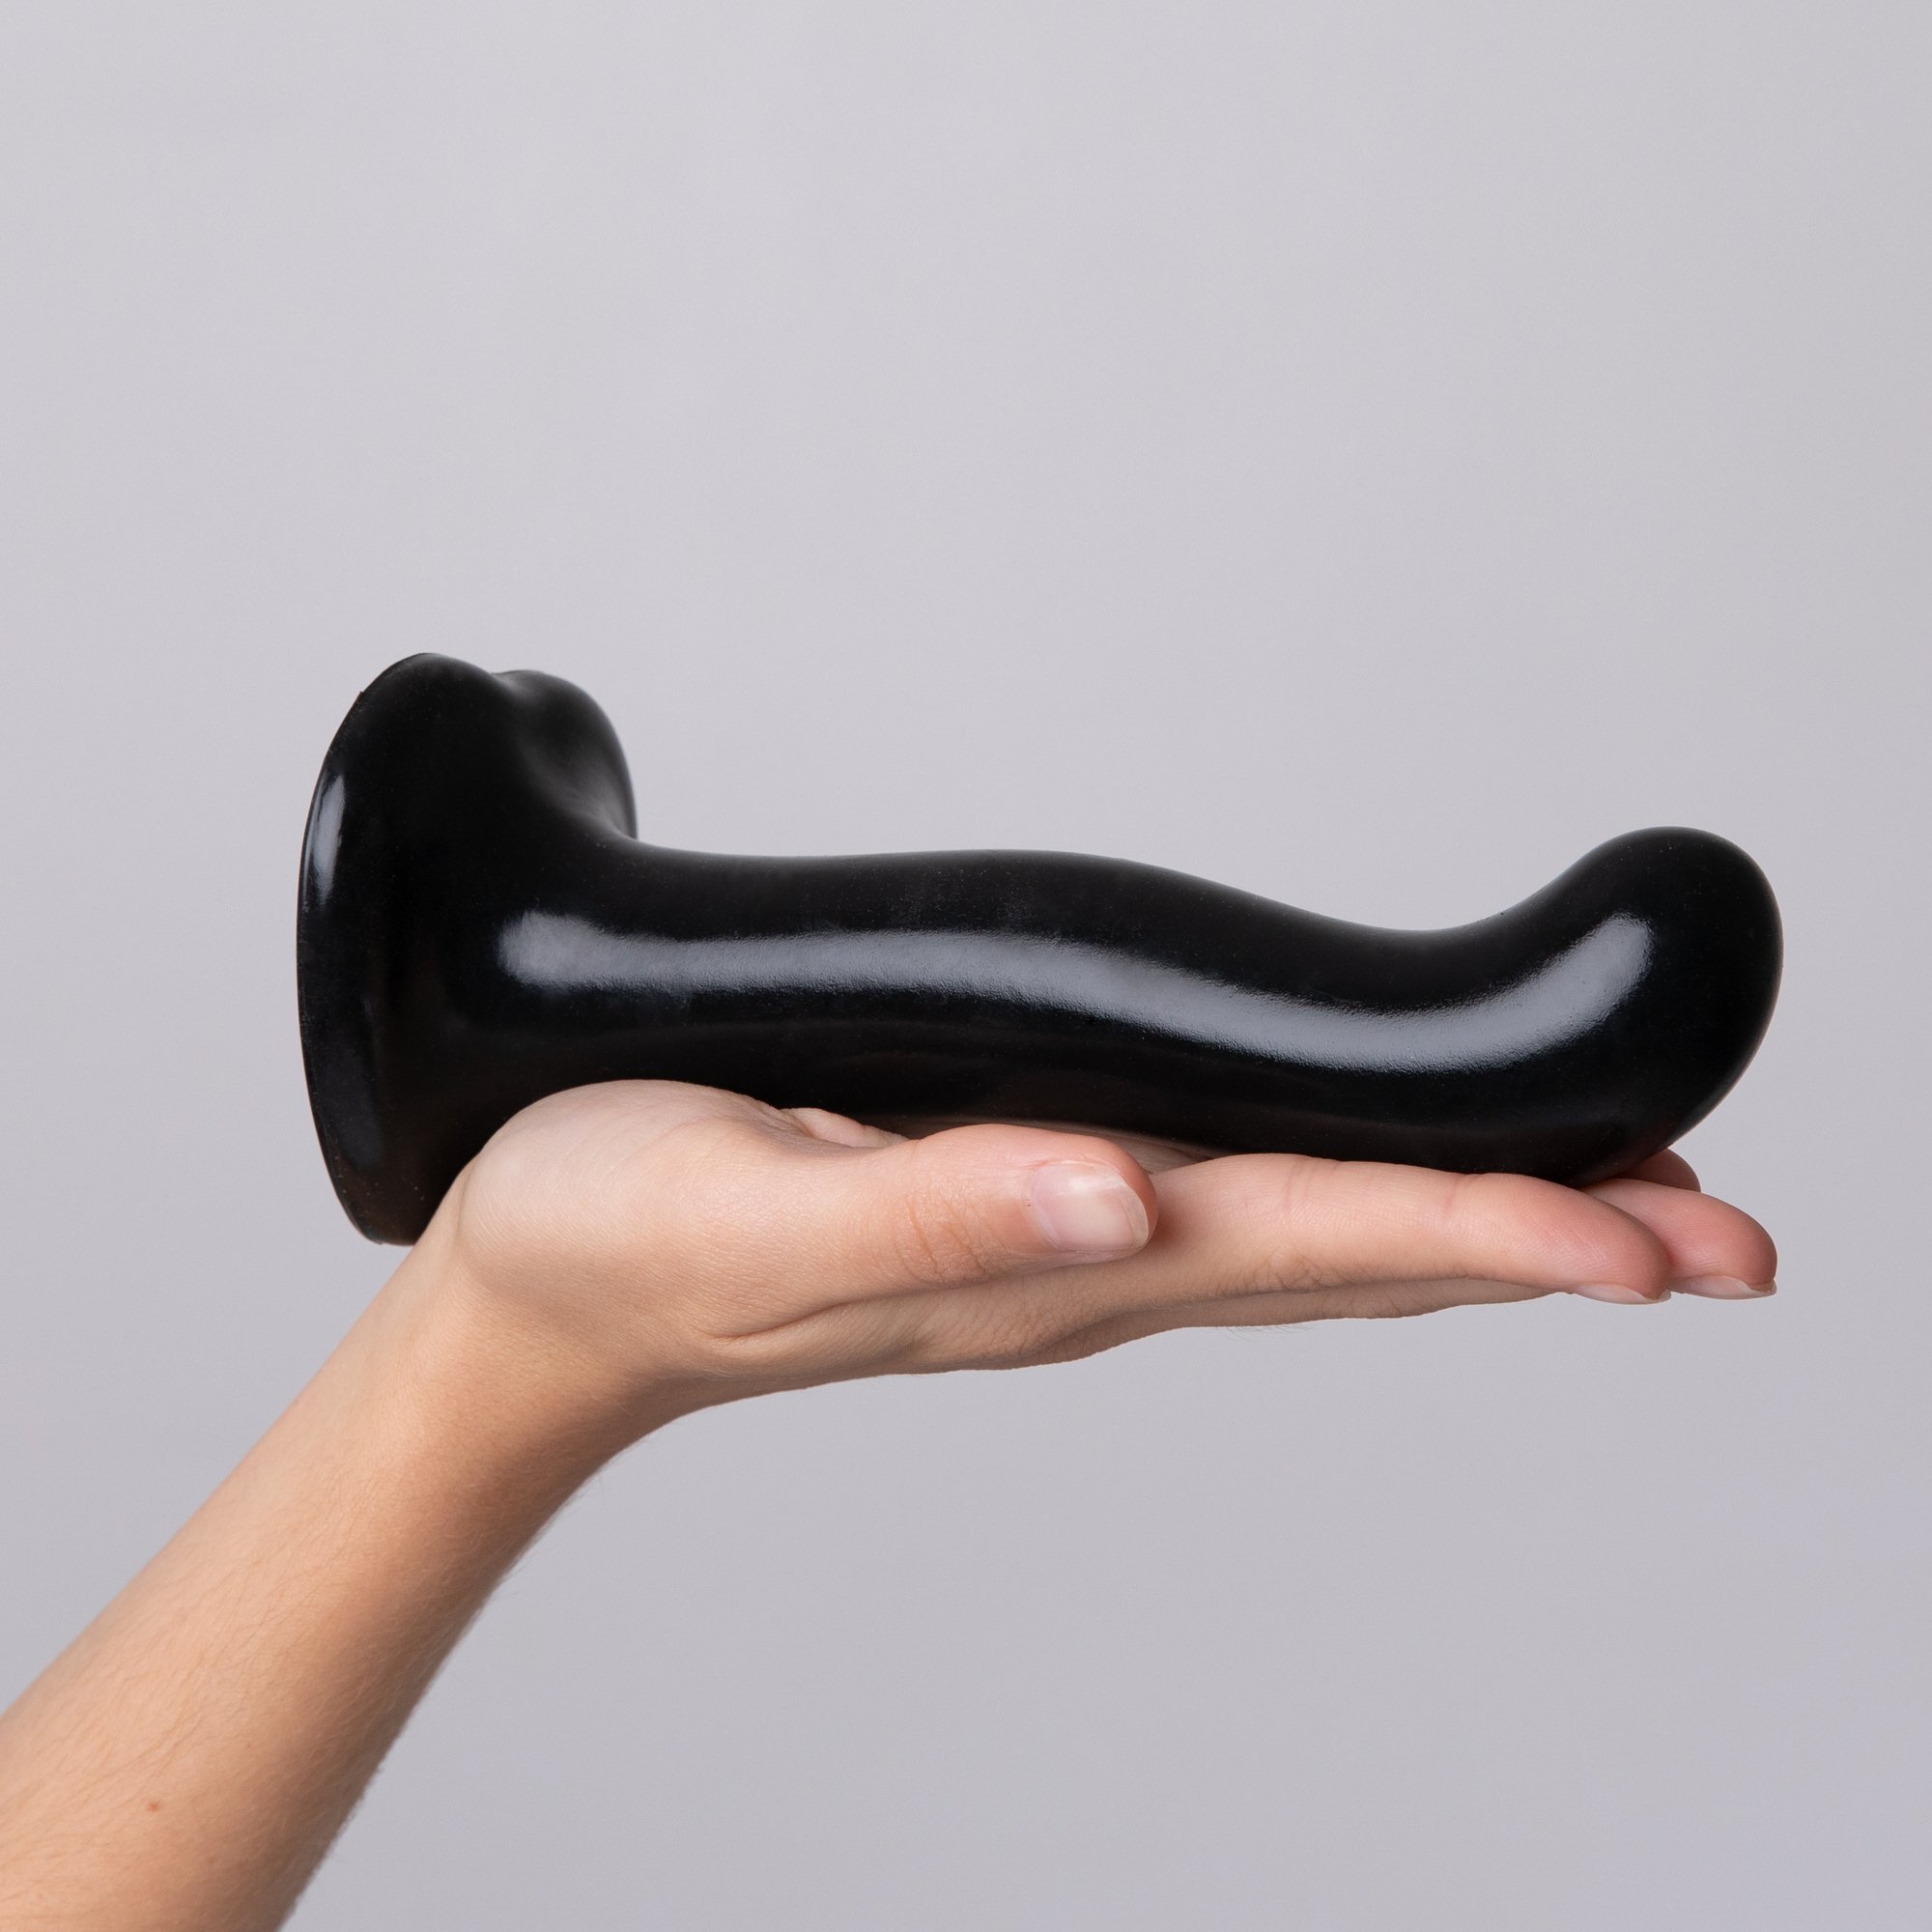 Dildo Point G & P by Strap-on-Me (online store)